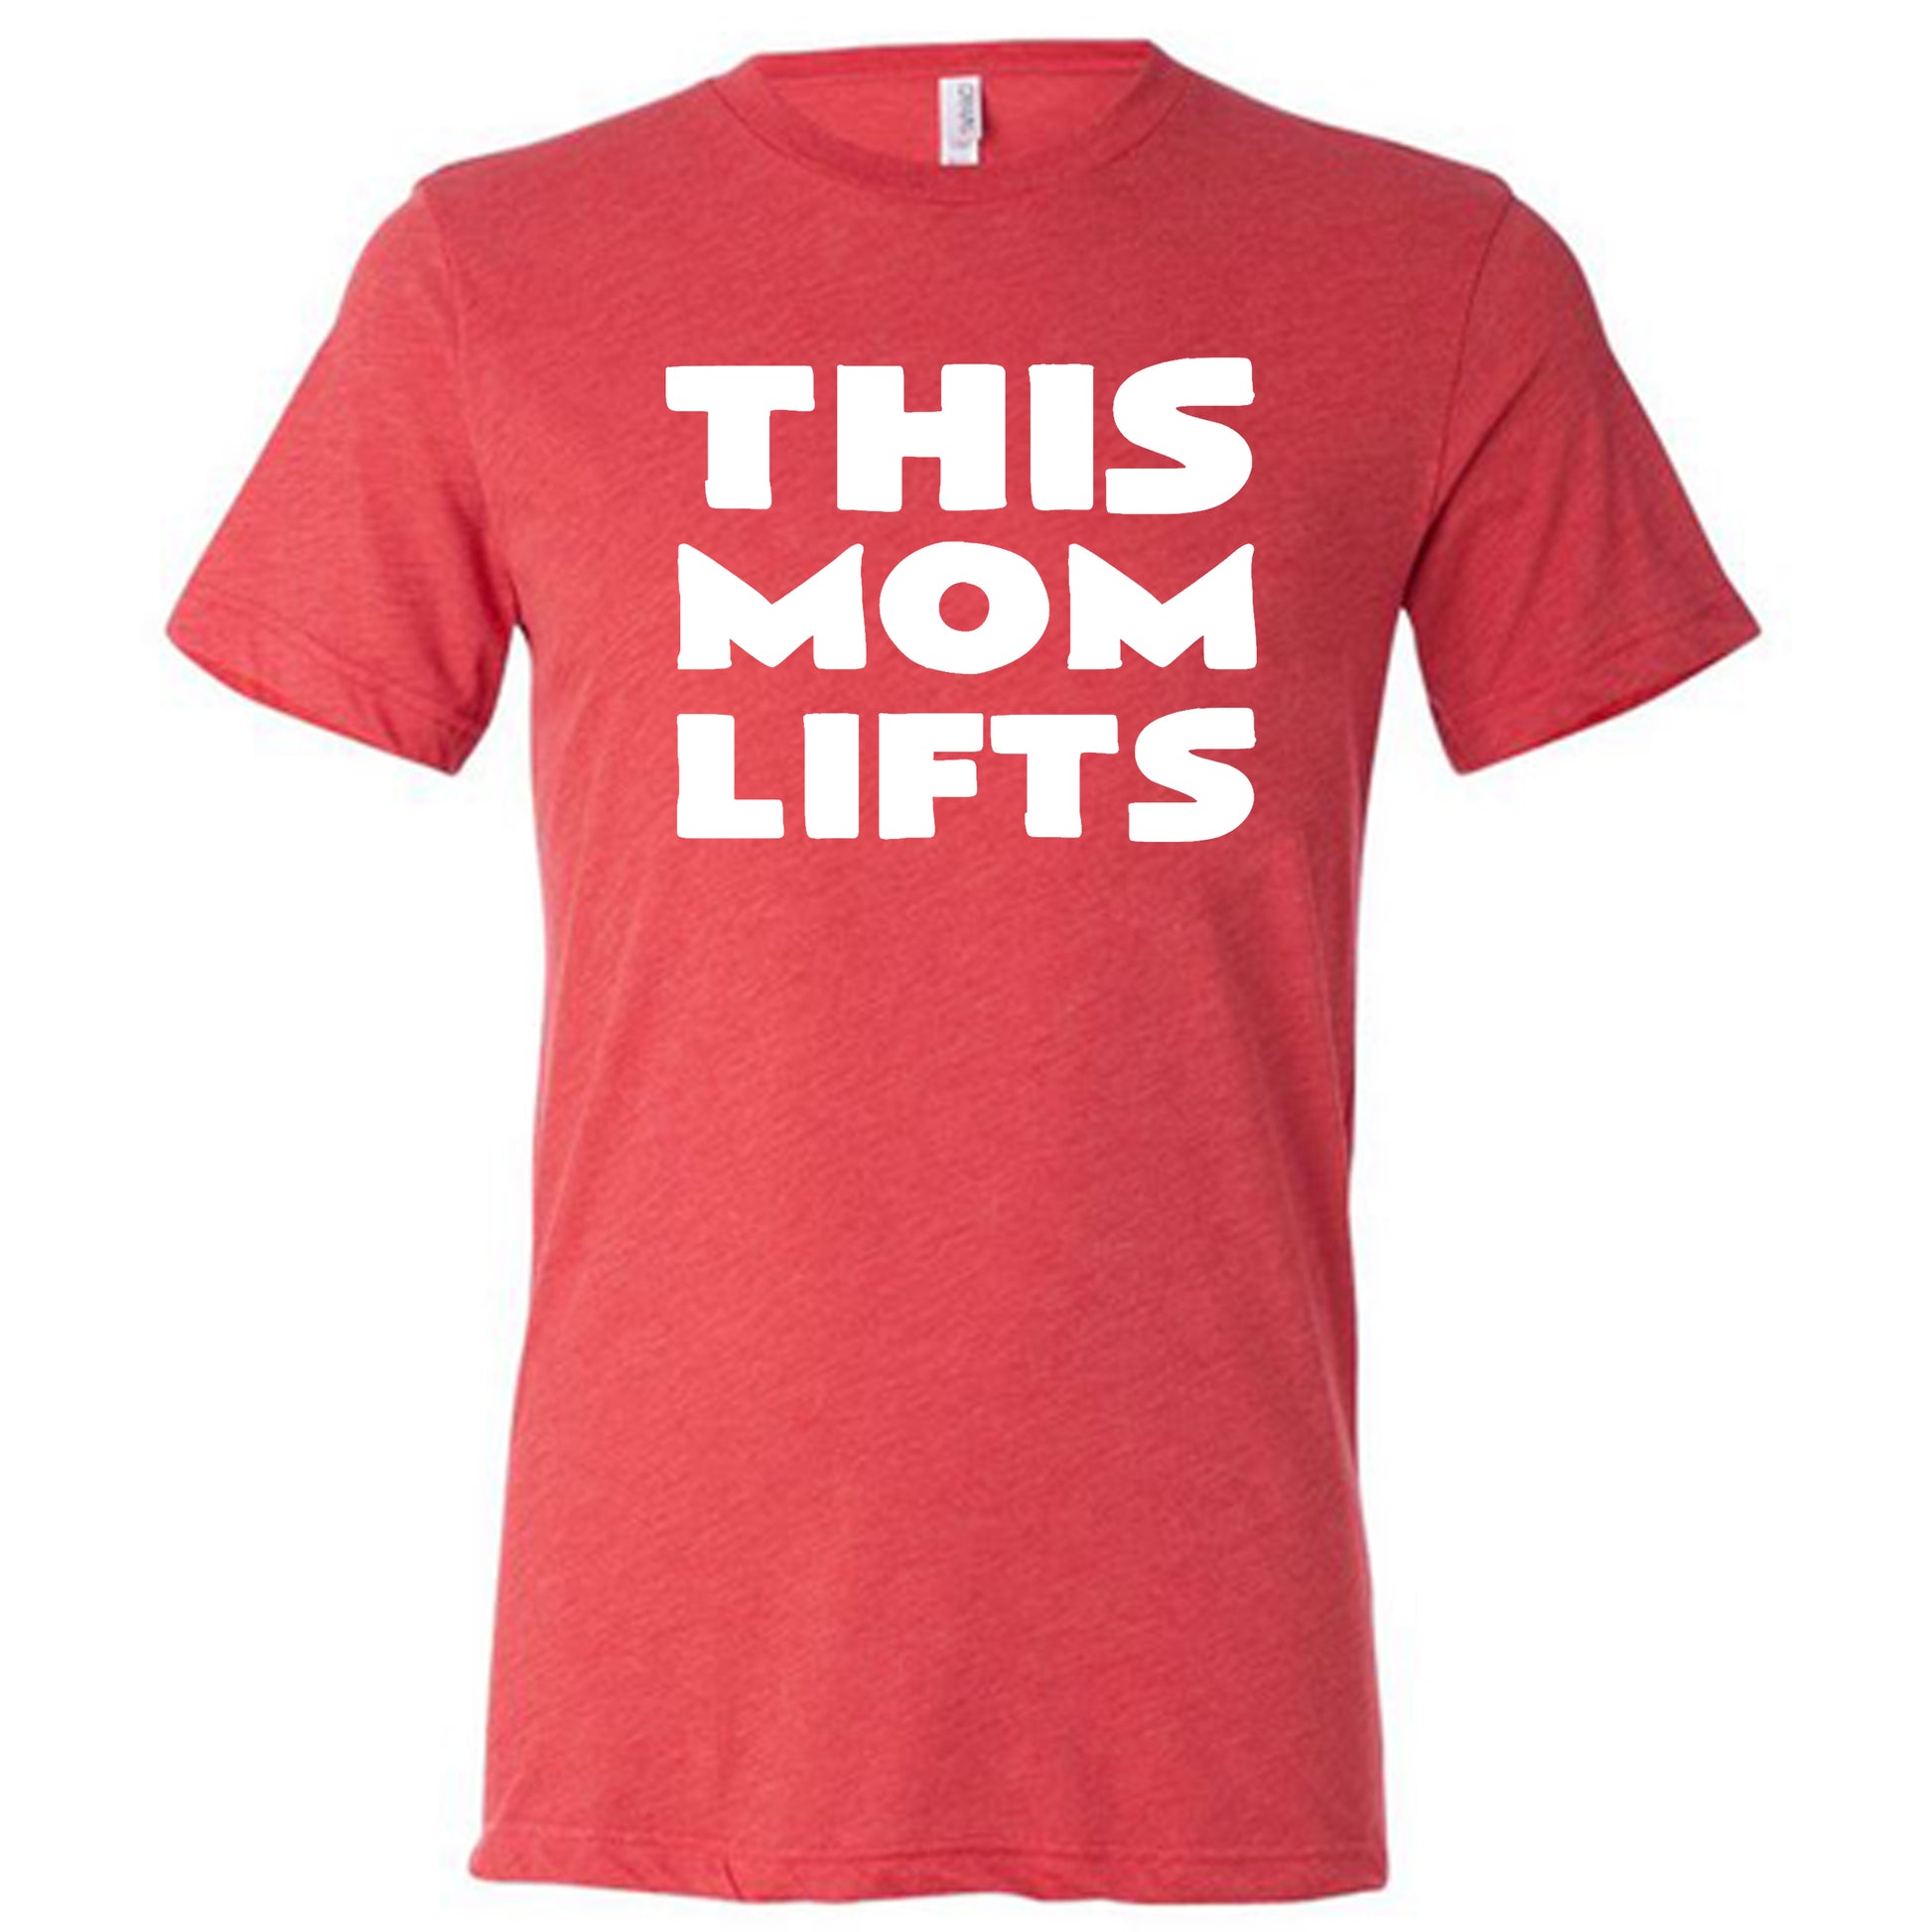 red unisex tee shirt with the saying "this mom lifts" in the center in white lettering